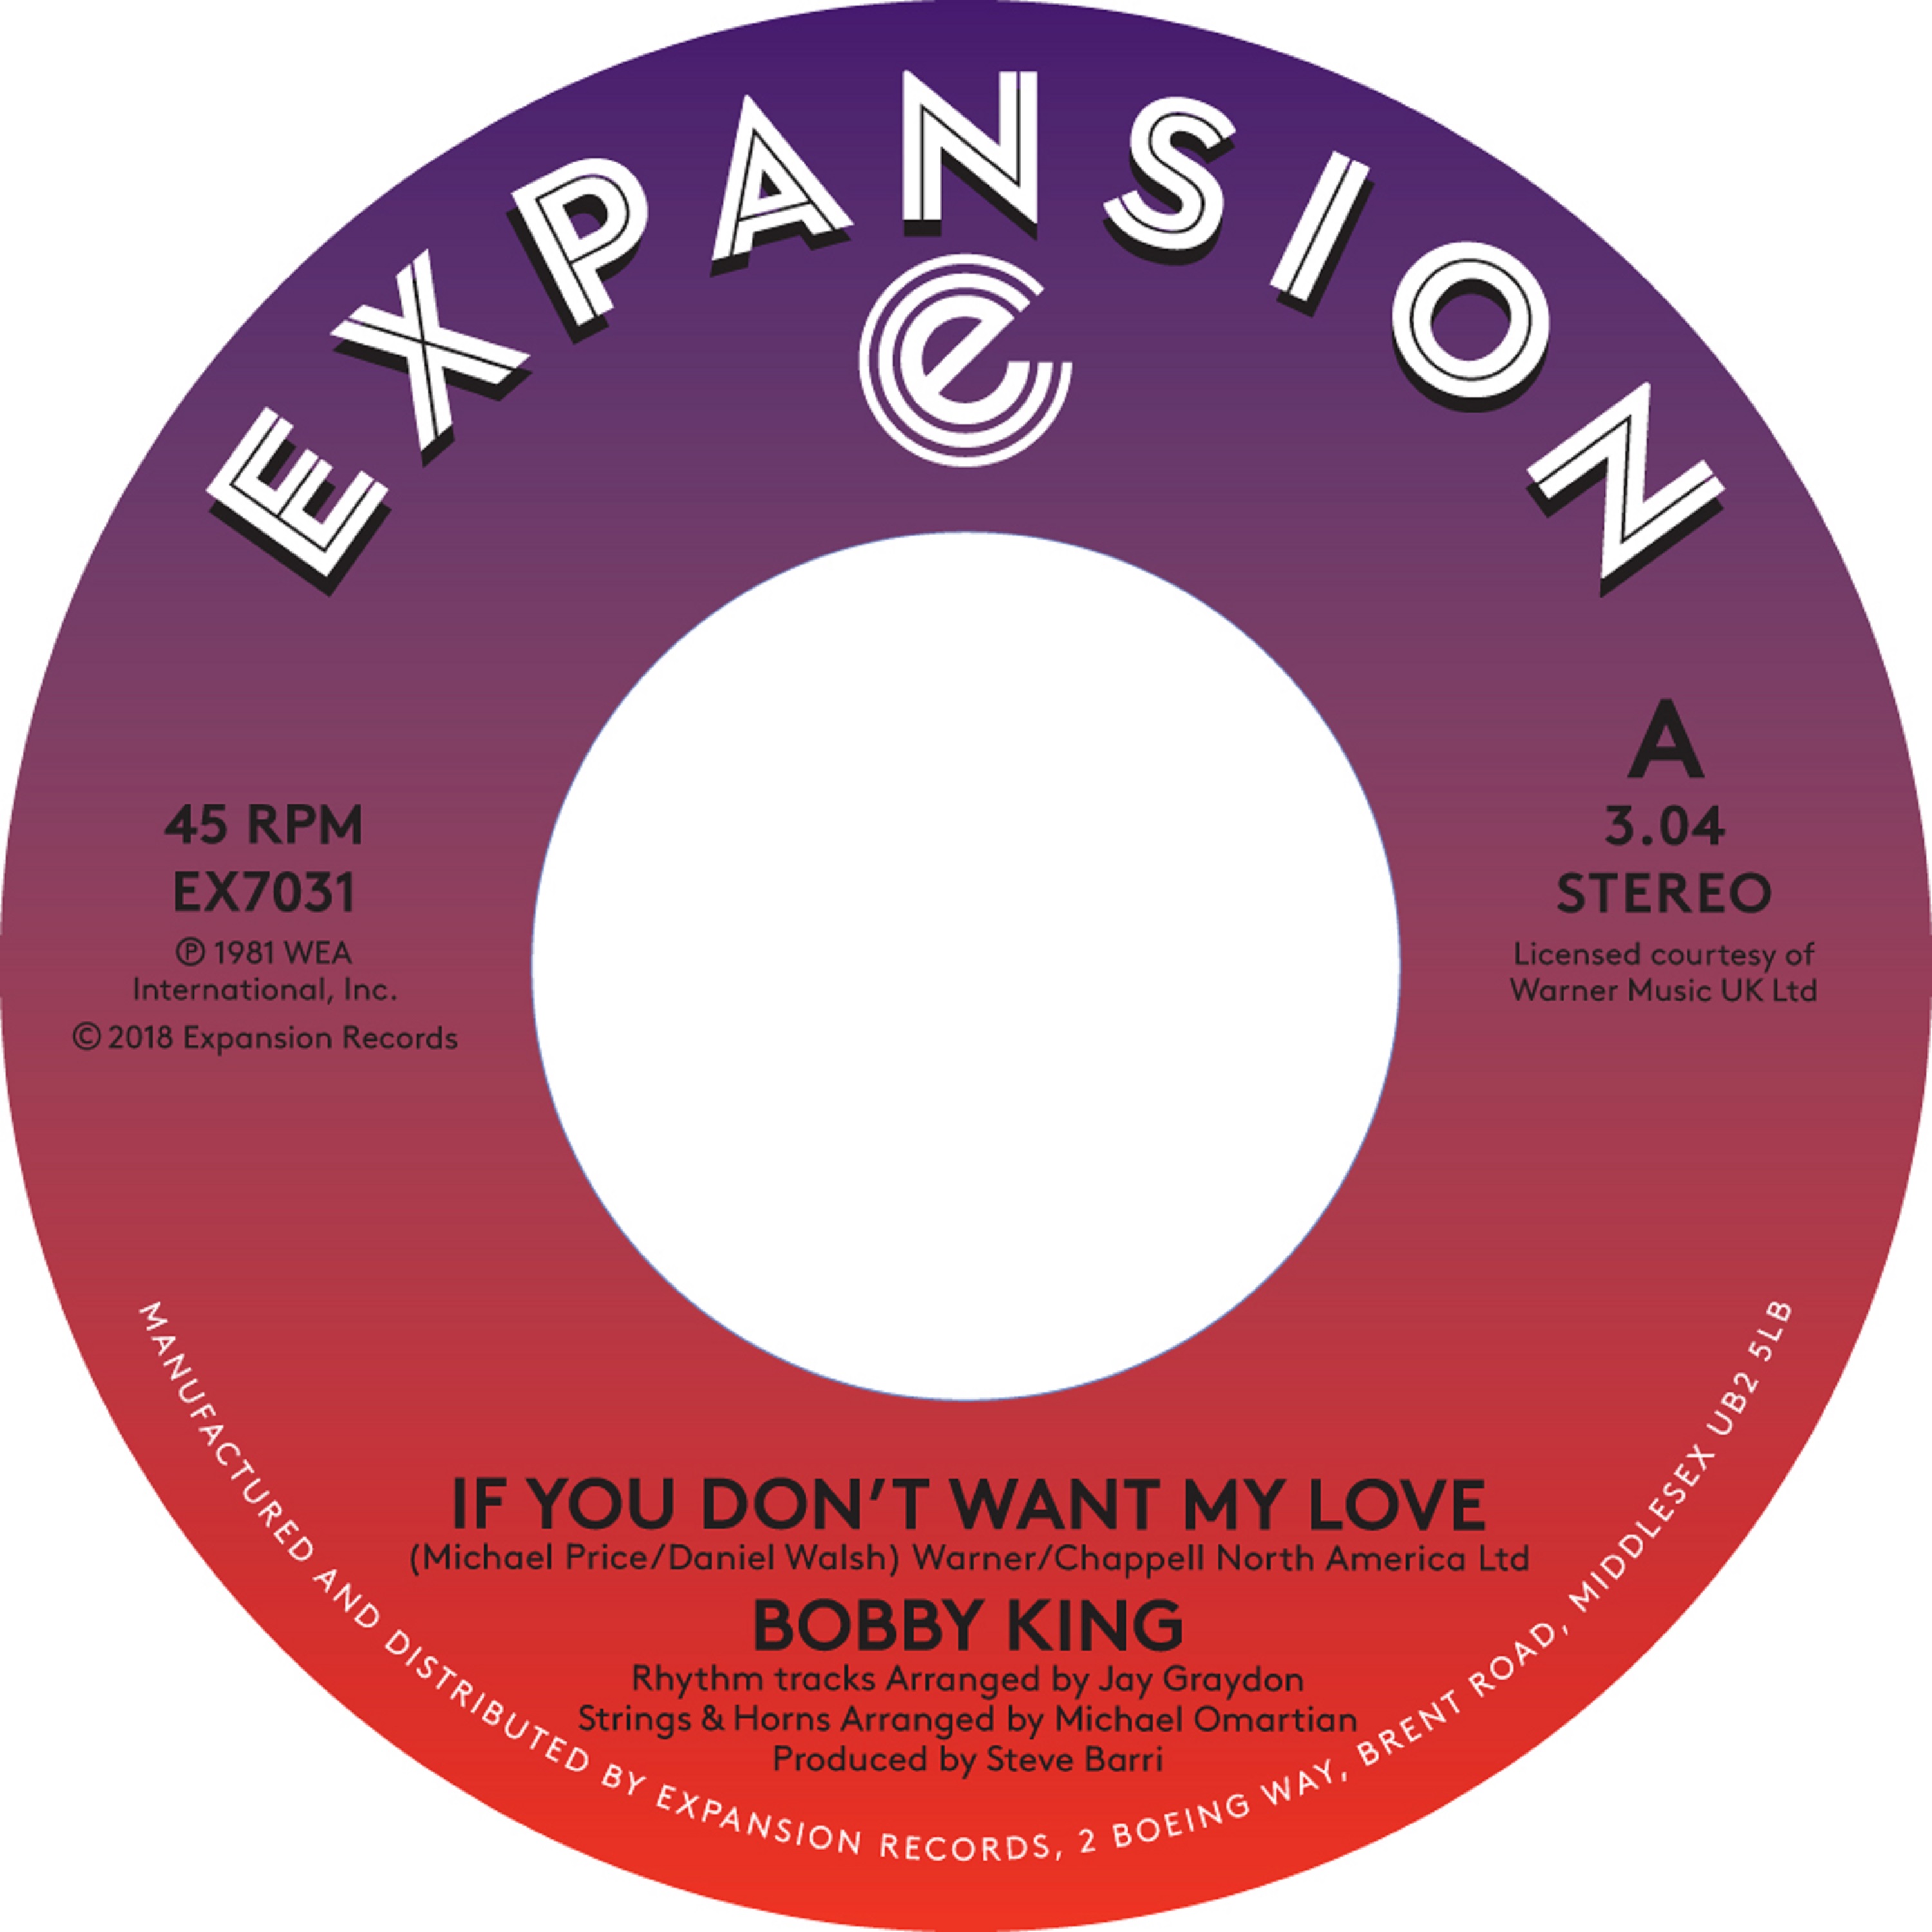 Bobby King/IF YOU DON'T WANT & LOVERS 7"